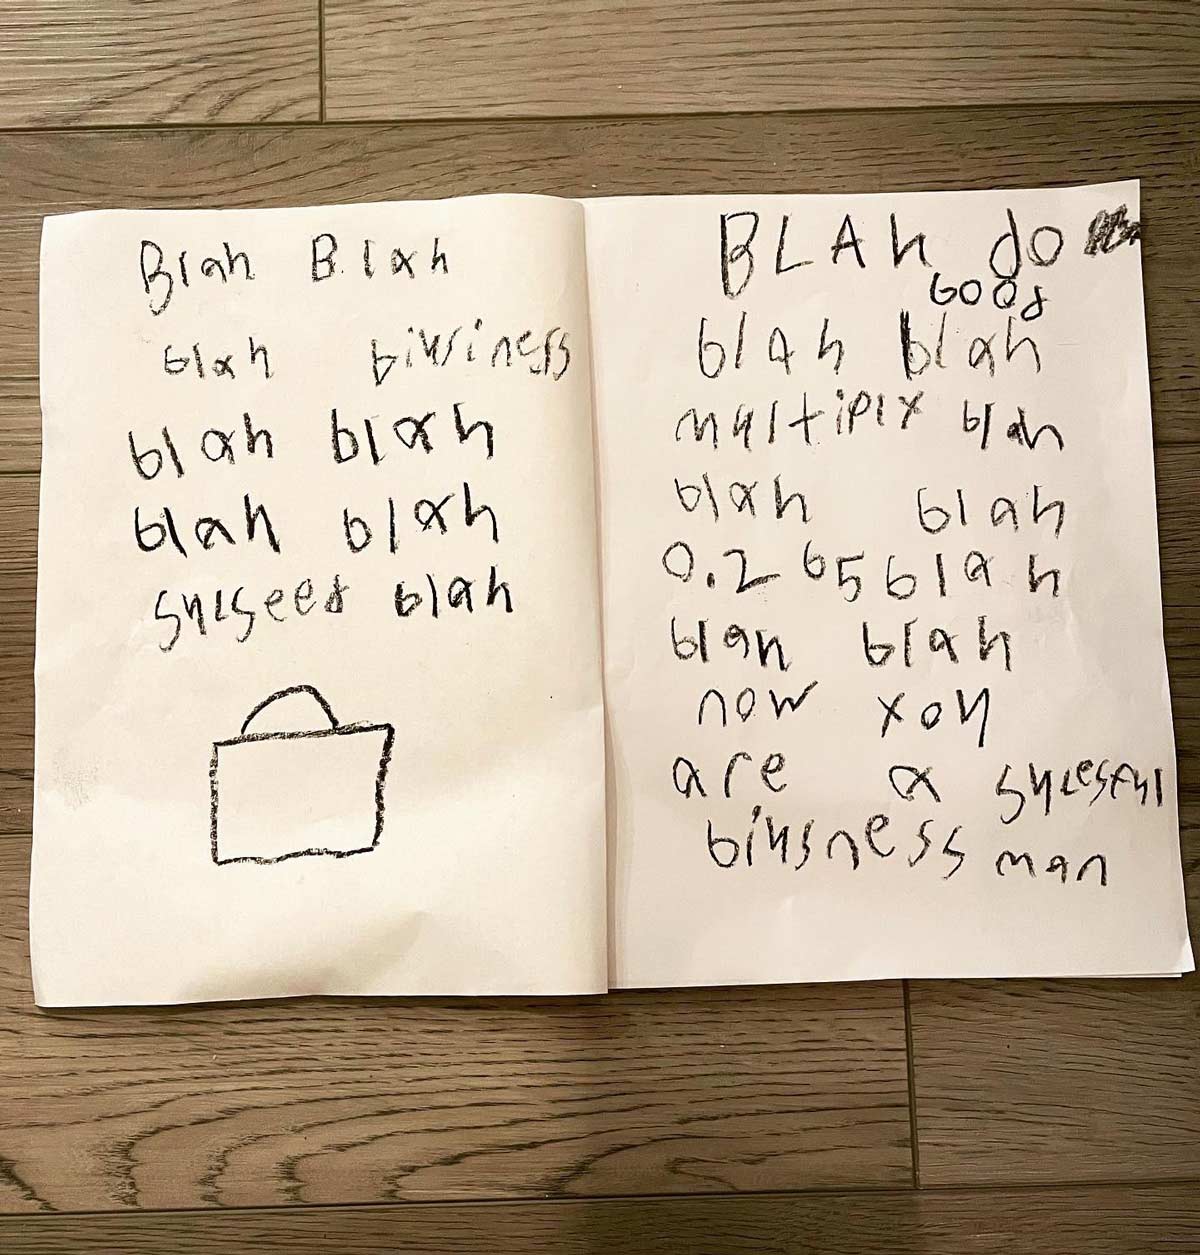 My daughter wrote a book